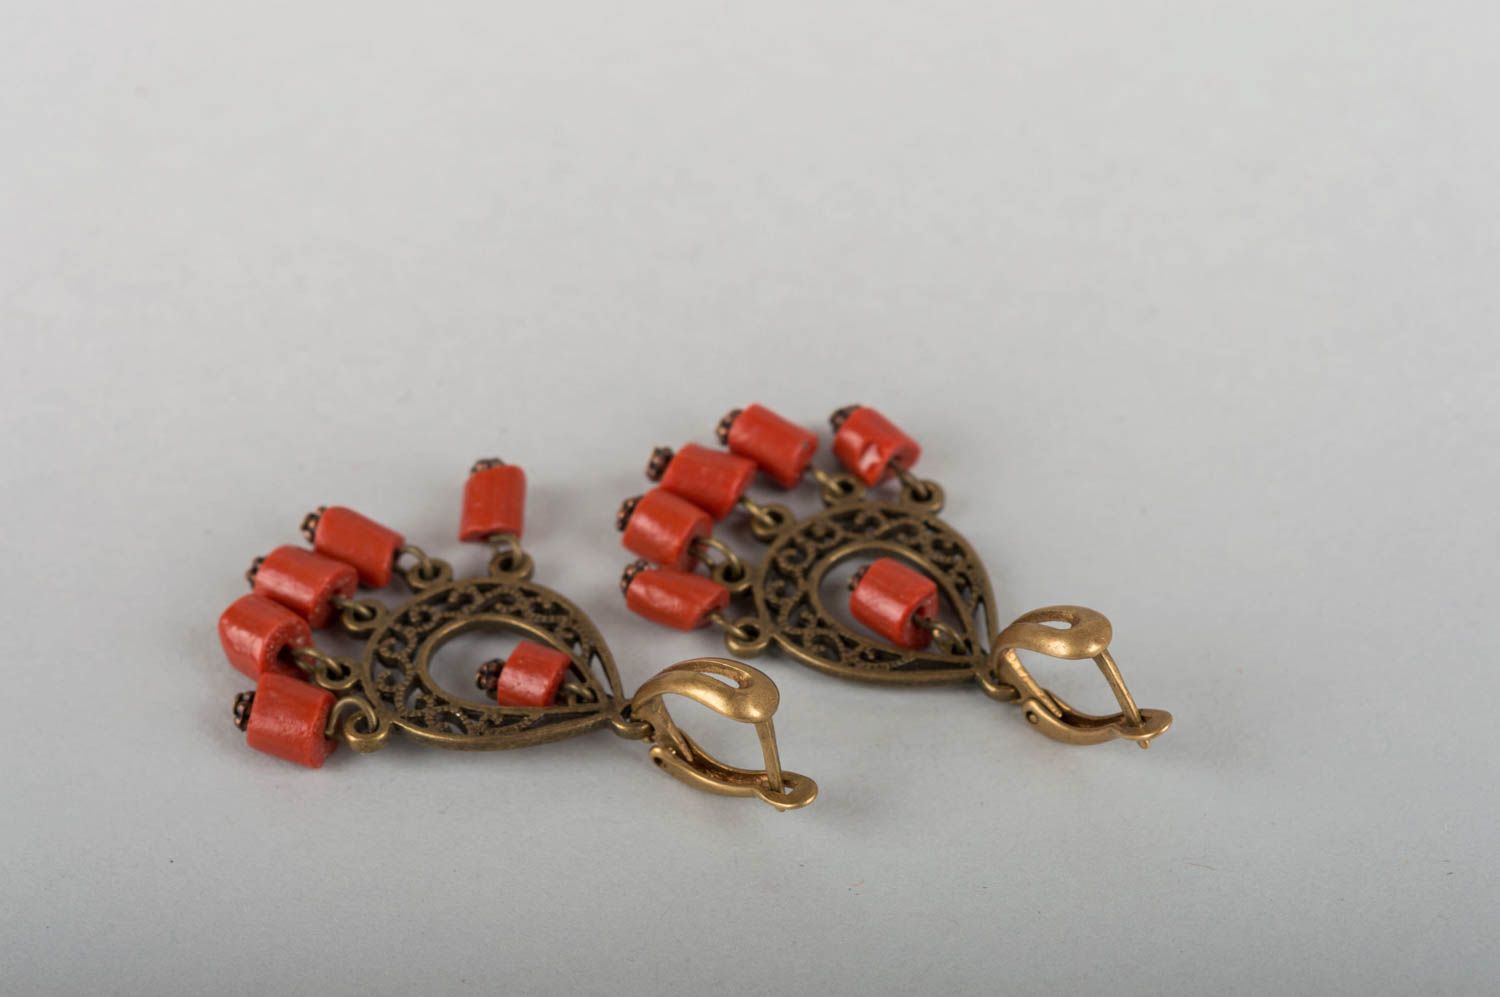 Handmade cute earrings made of natural stone coral with brass fittings photo 3